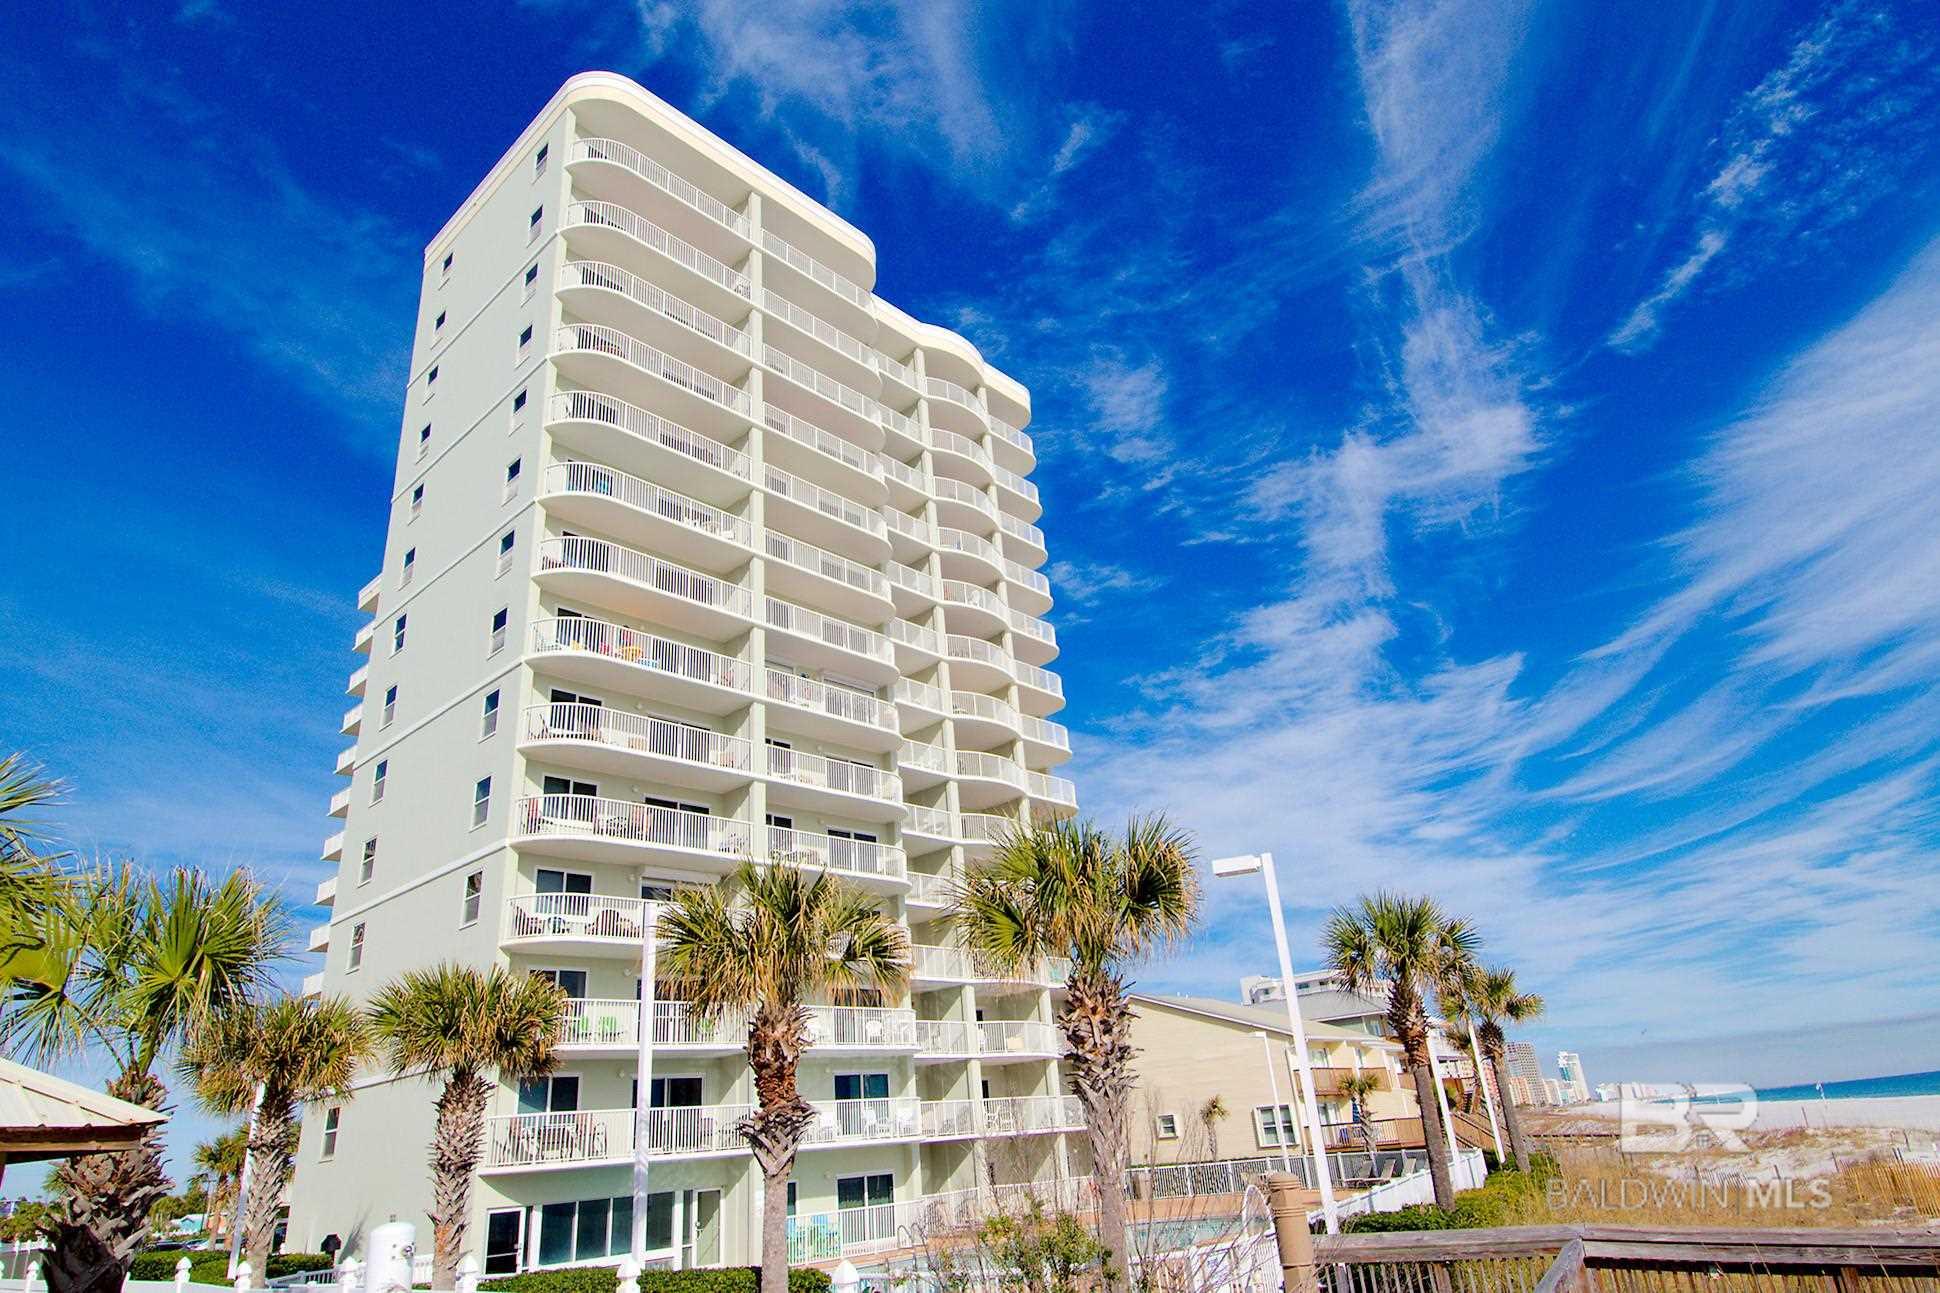 Beautifully Appointed 2 Bed 2 Bath Ground Floor Unit in Tradewinds in the very heart of Orange Beach. Location Location Location You are only 30+ footsteps to the beach from your unit. This unit shows pride of ownership throughout with updated countertops, additional kitchen cabinets and updated kitchen appliances. Incredibly convenient to the Gulf beaches and within walking distance to restaurants and shopping. And No Waiting for an Elevator!